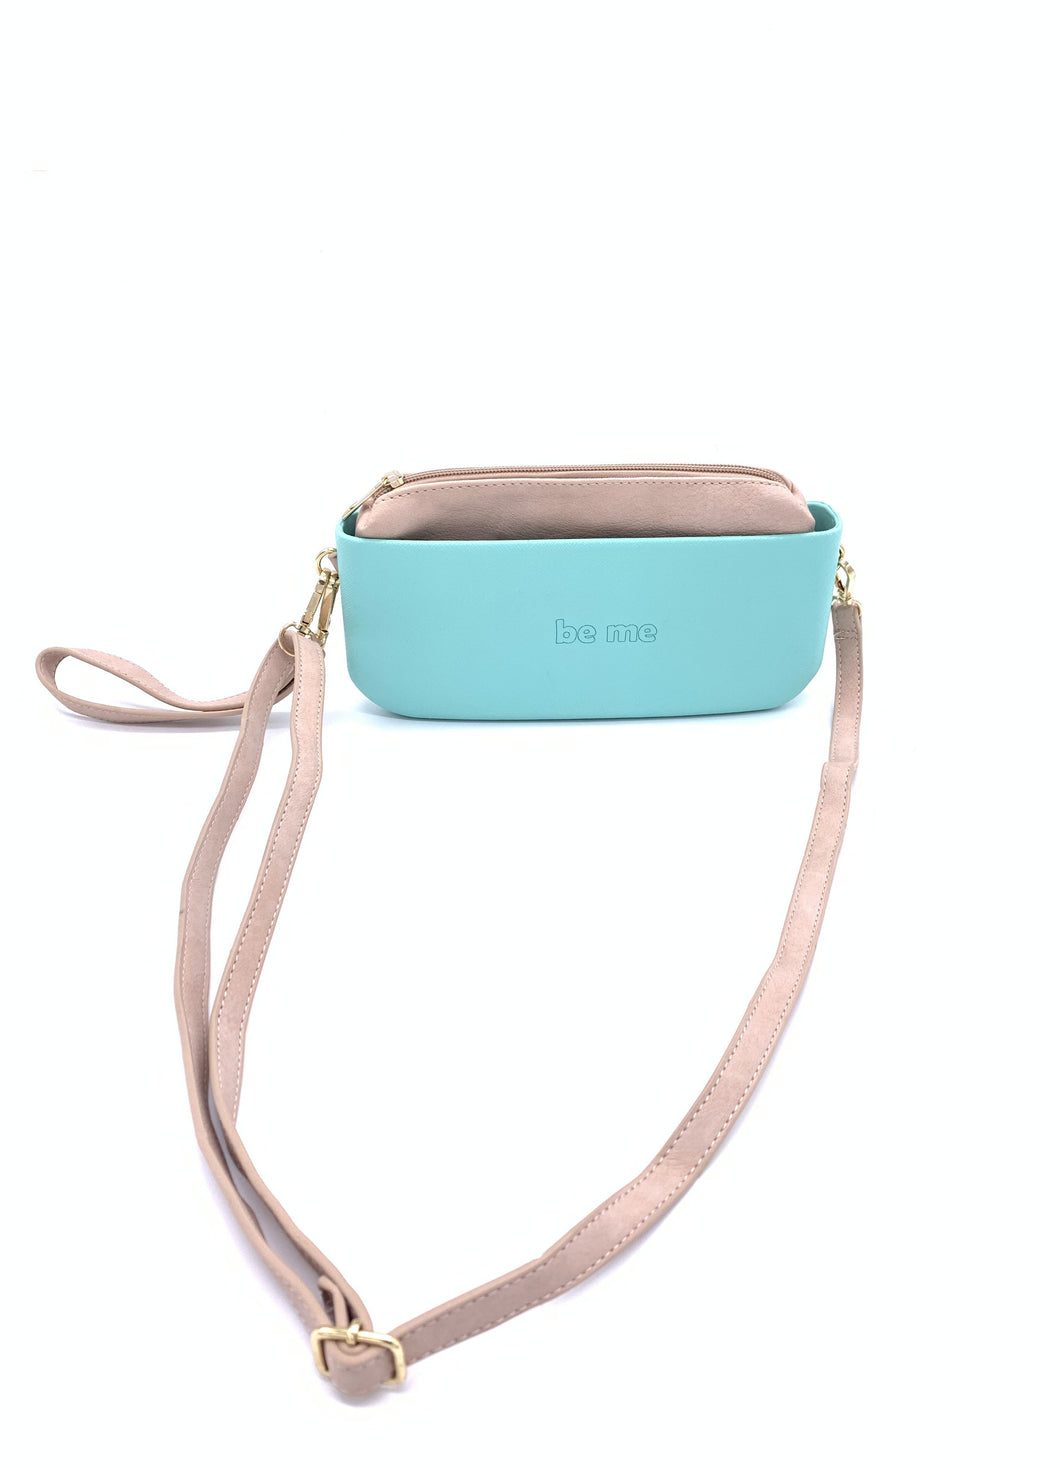 Be Me Baguette Bag - Mint with Beige